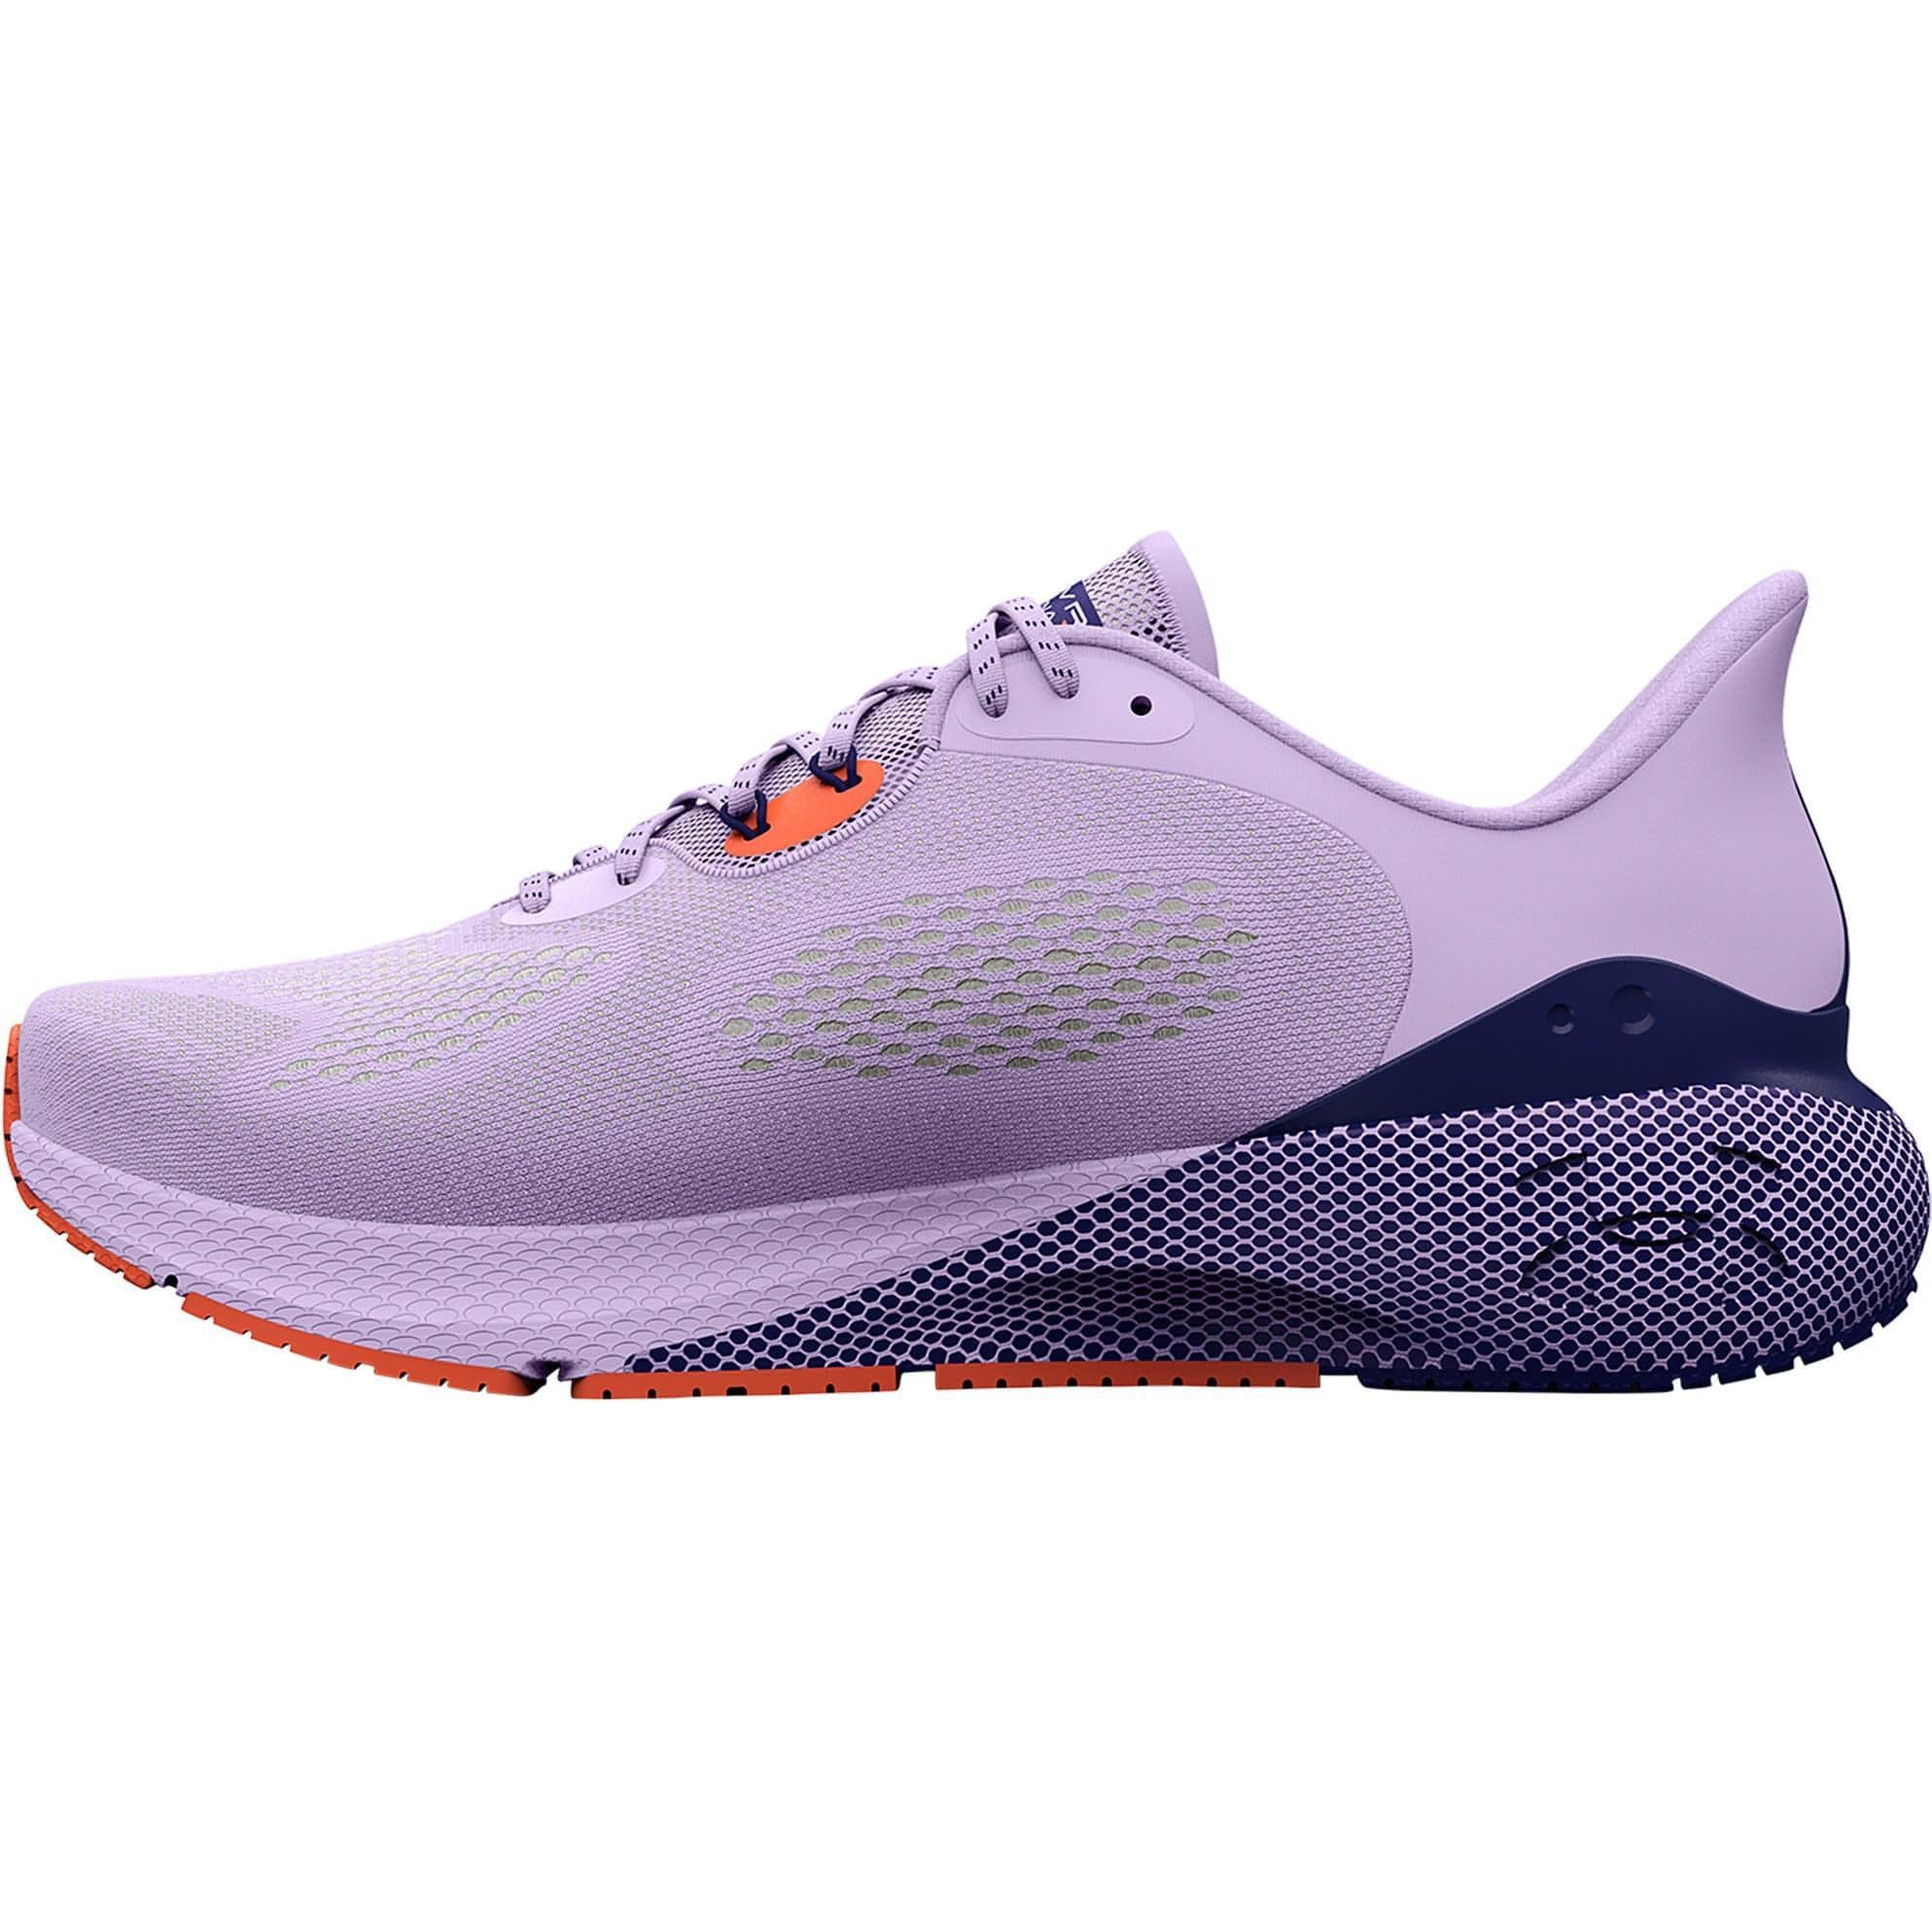 Under Armour HOVR Machina 3 Womens Running Shoes - Purple